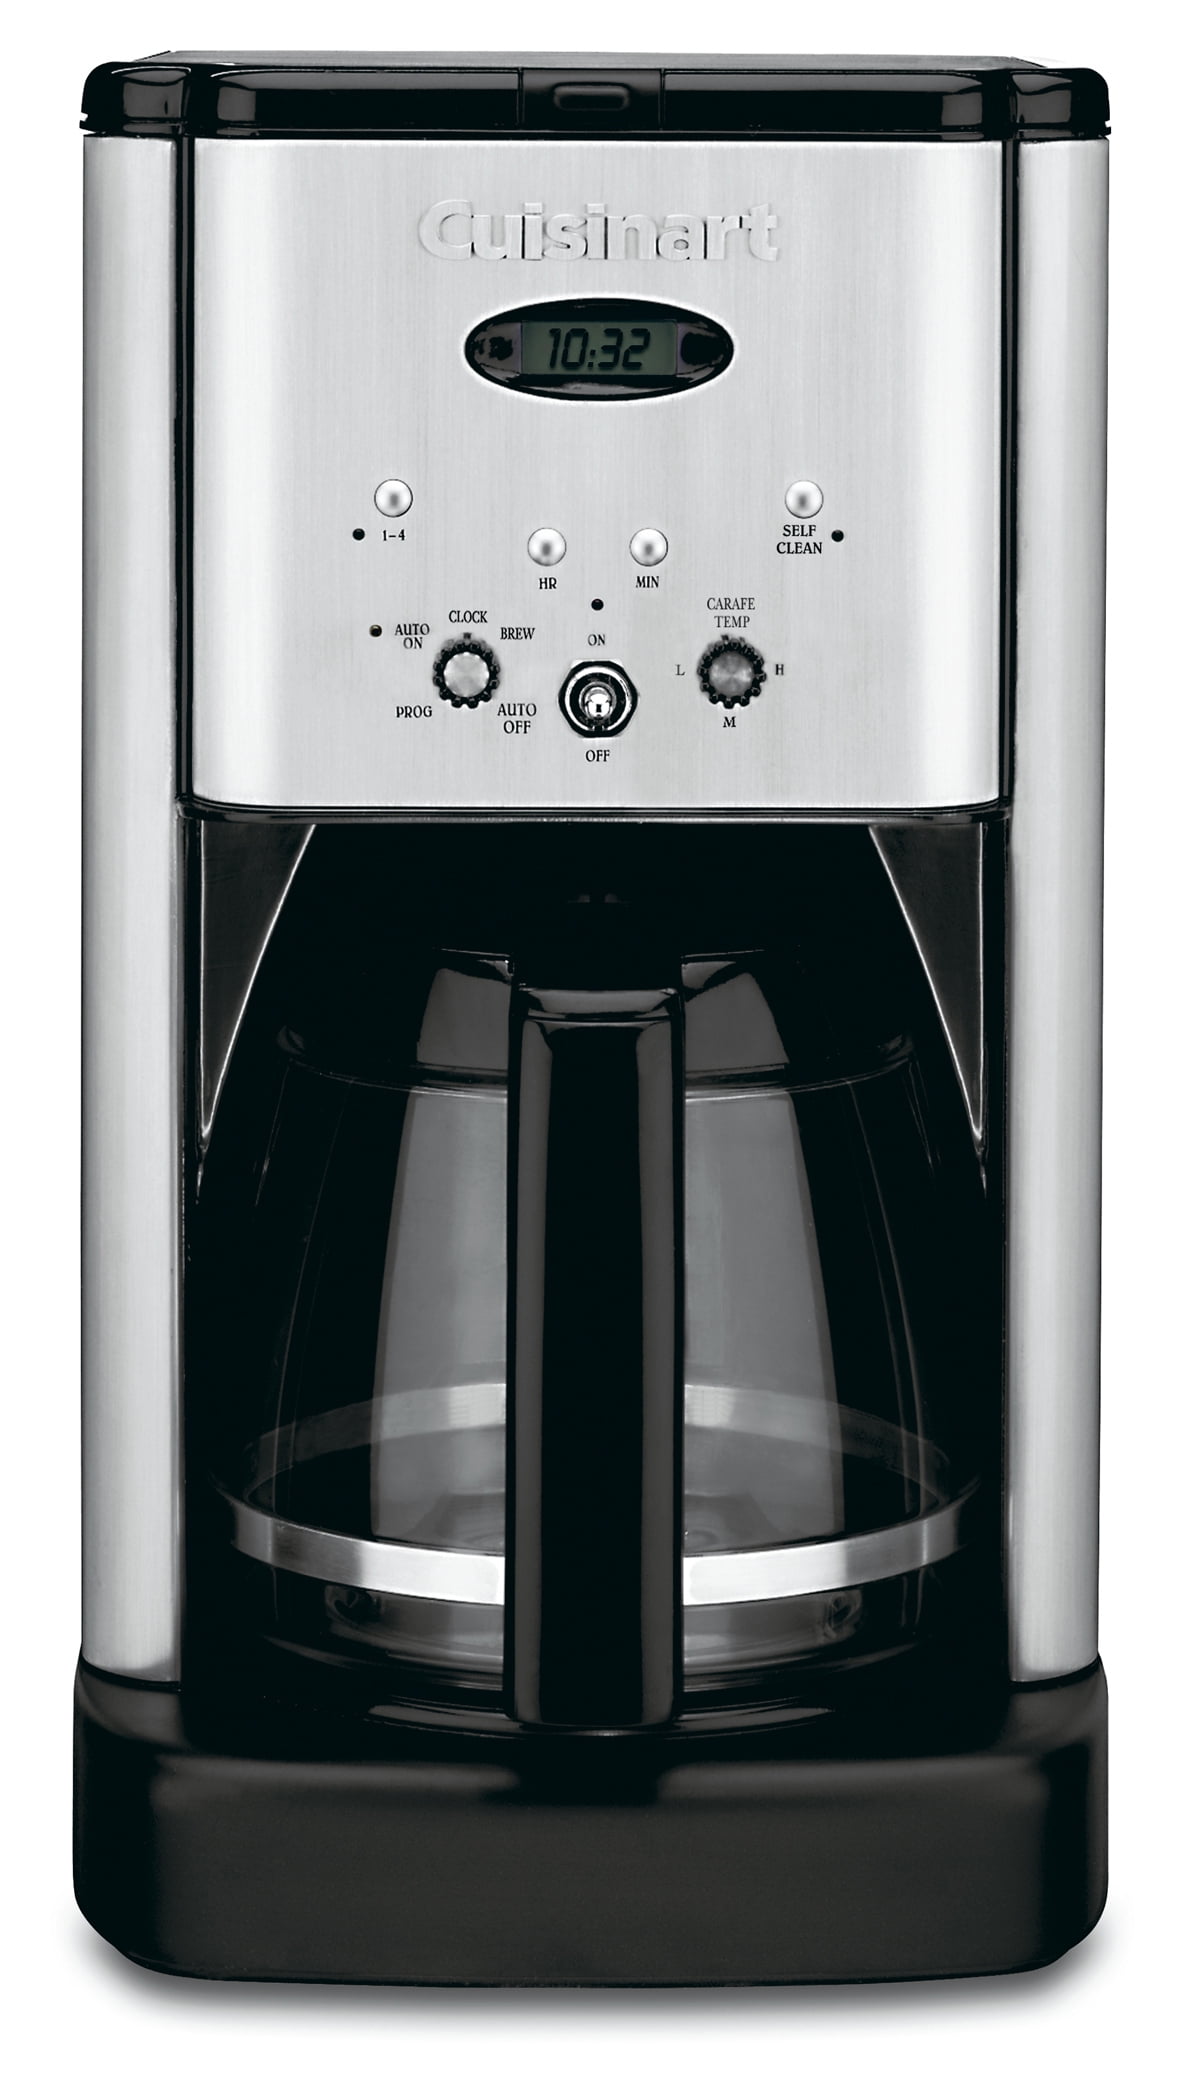 Home And Commercial 12-Cup Programmable Coffee Maker – ZEUS & RUTA